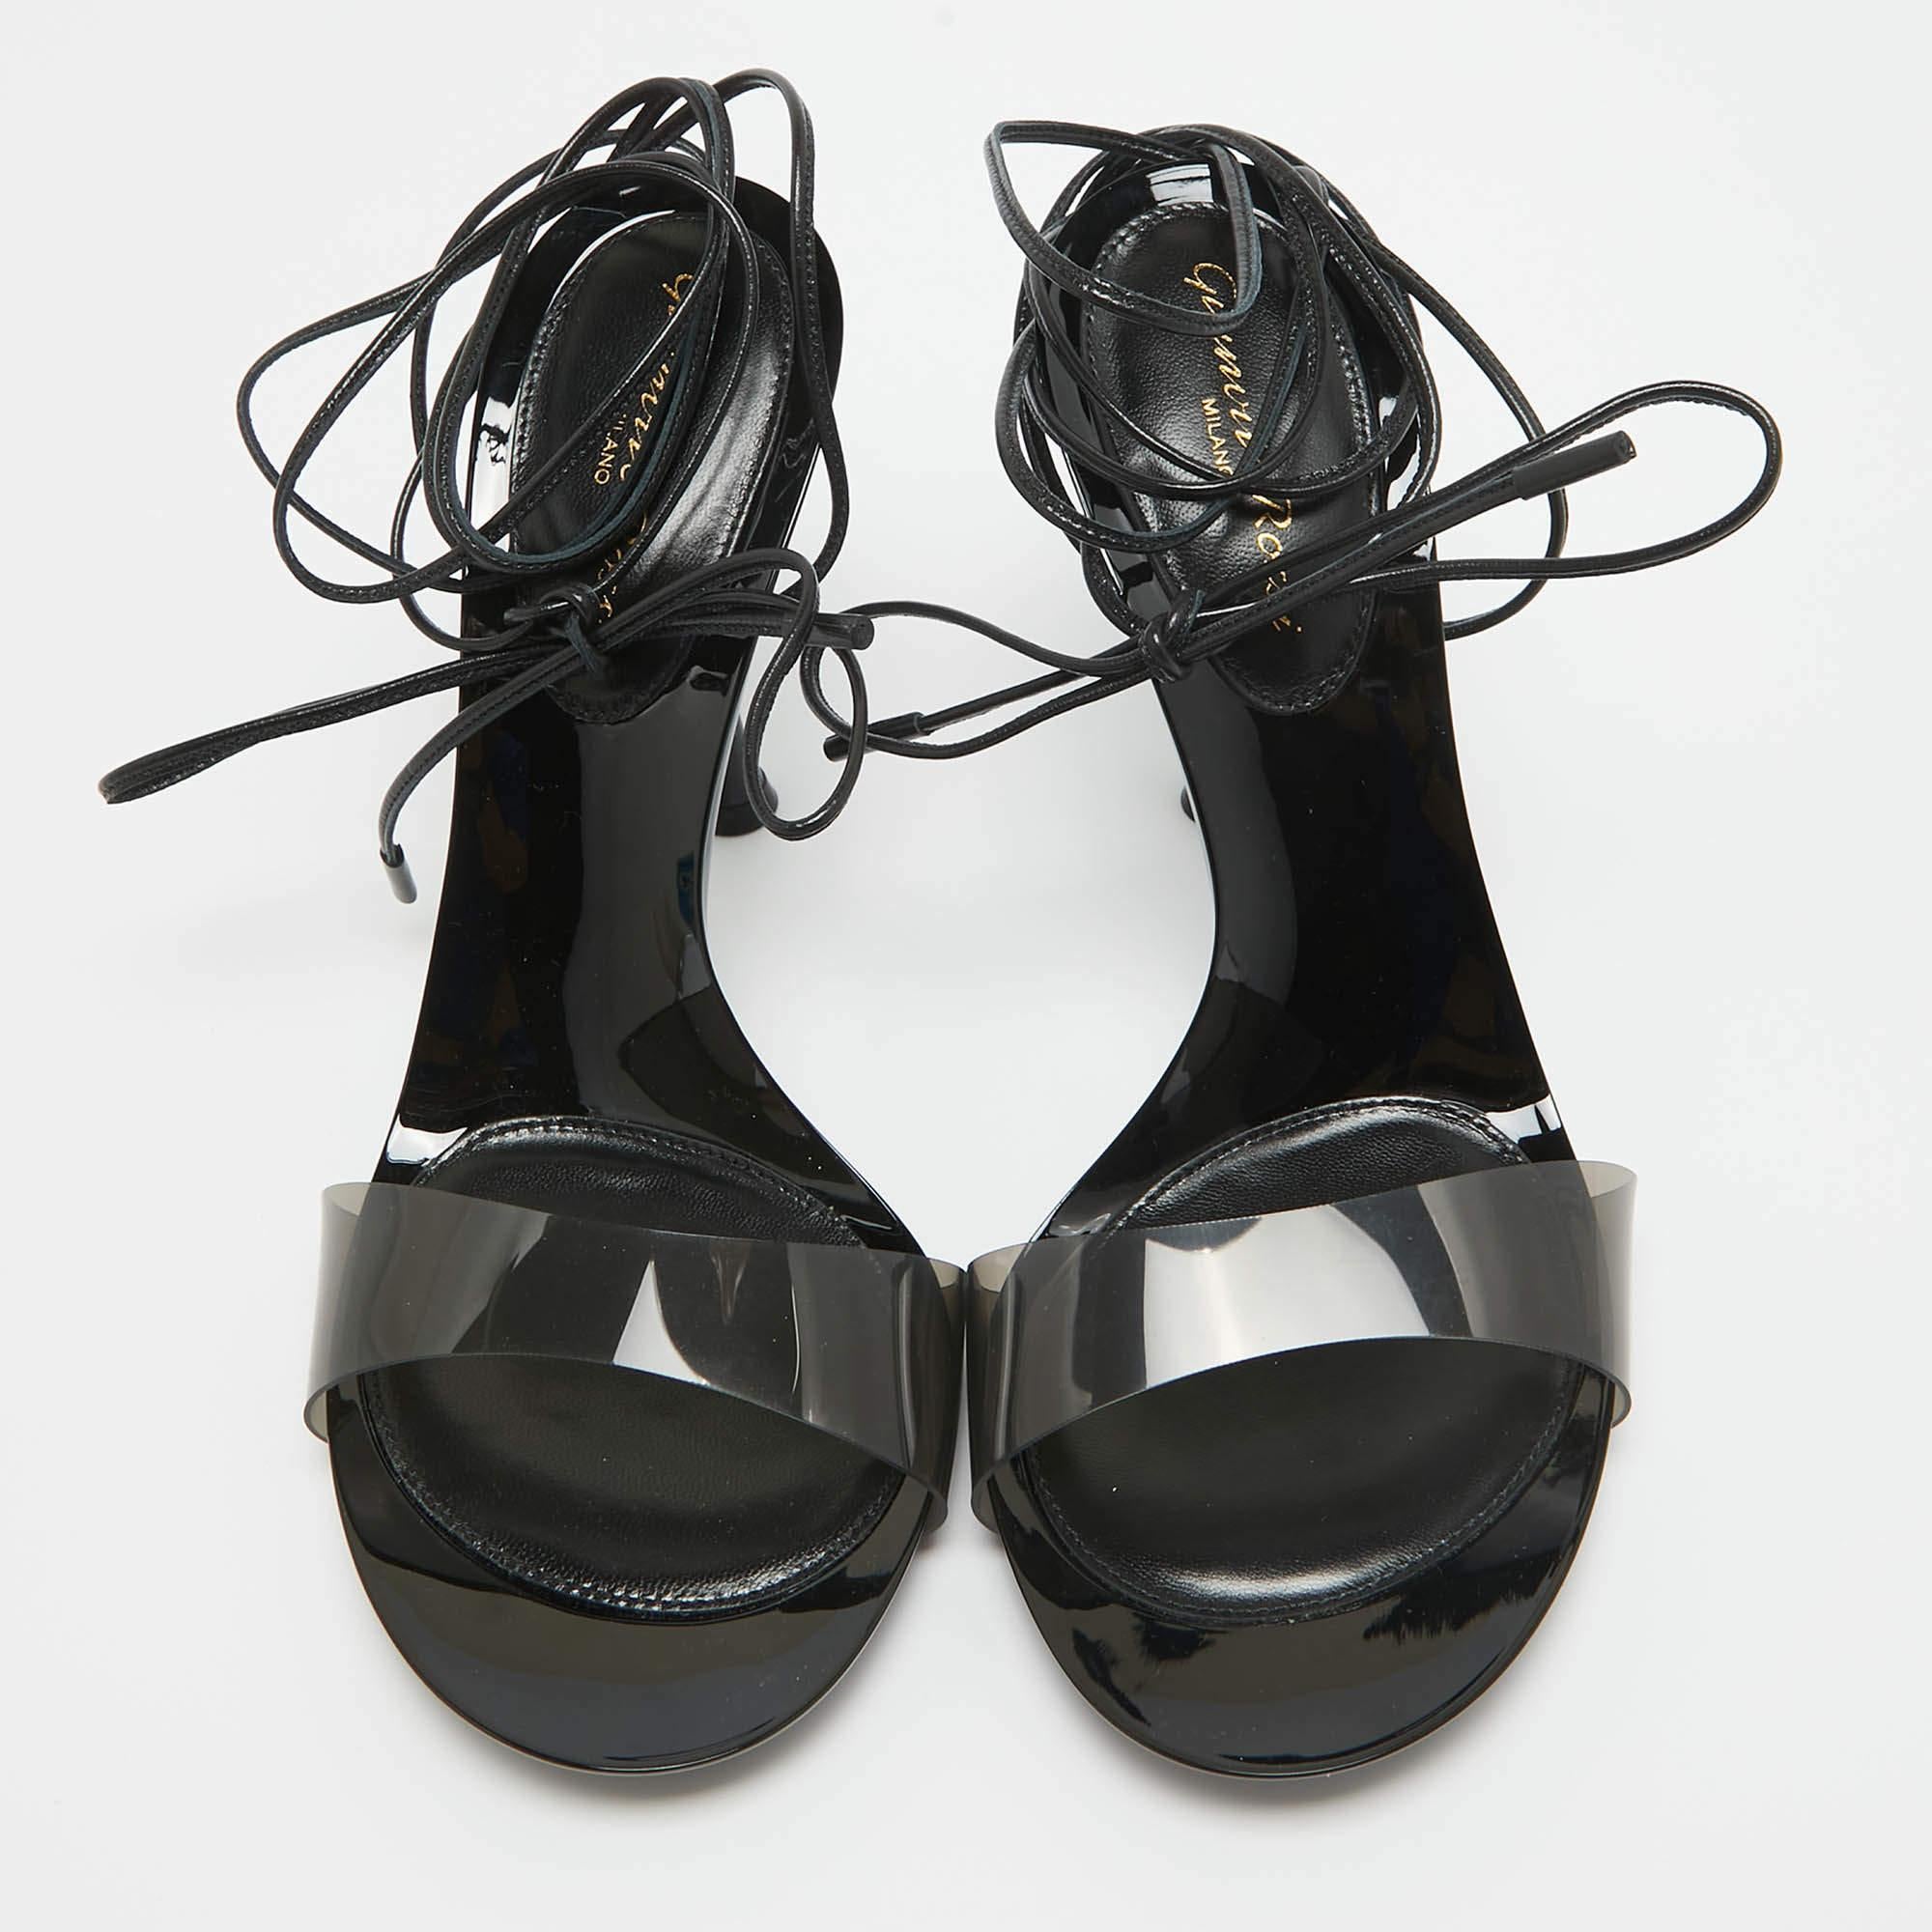 Gianvito Rossi Black PVC and Leather Spice Sandals Size 39.5 For Sale 2